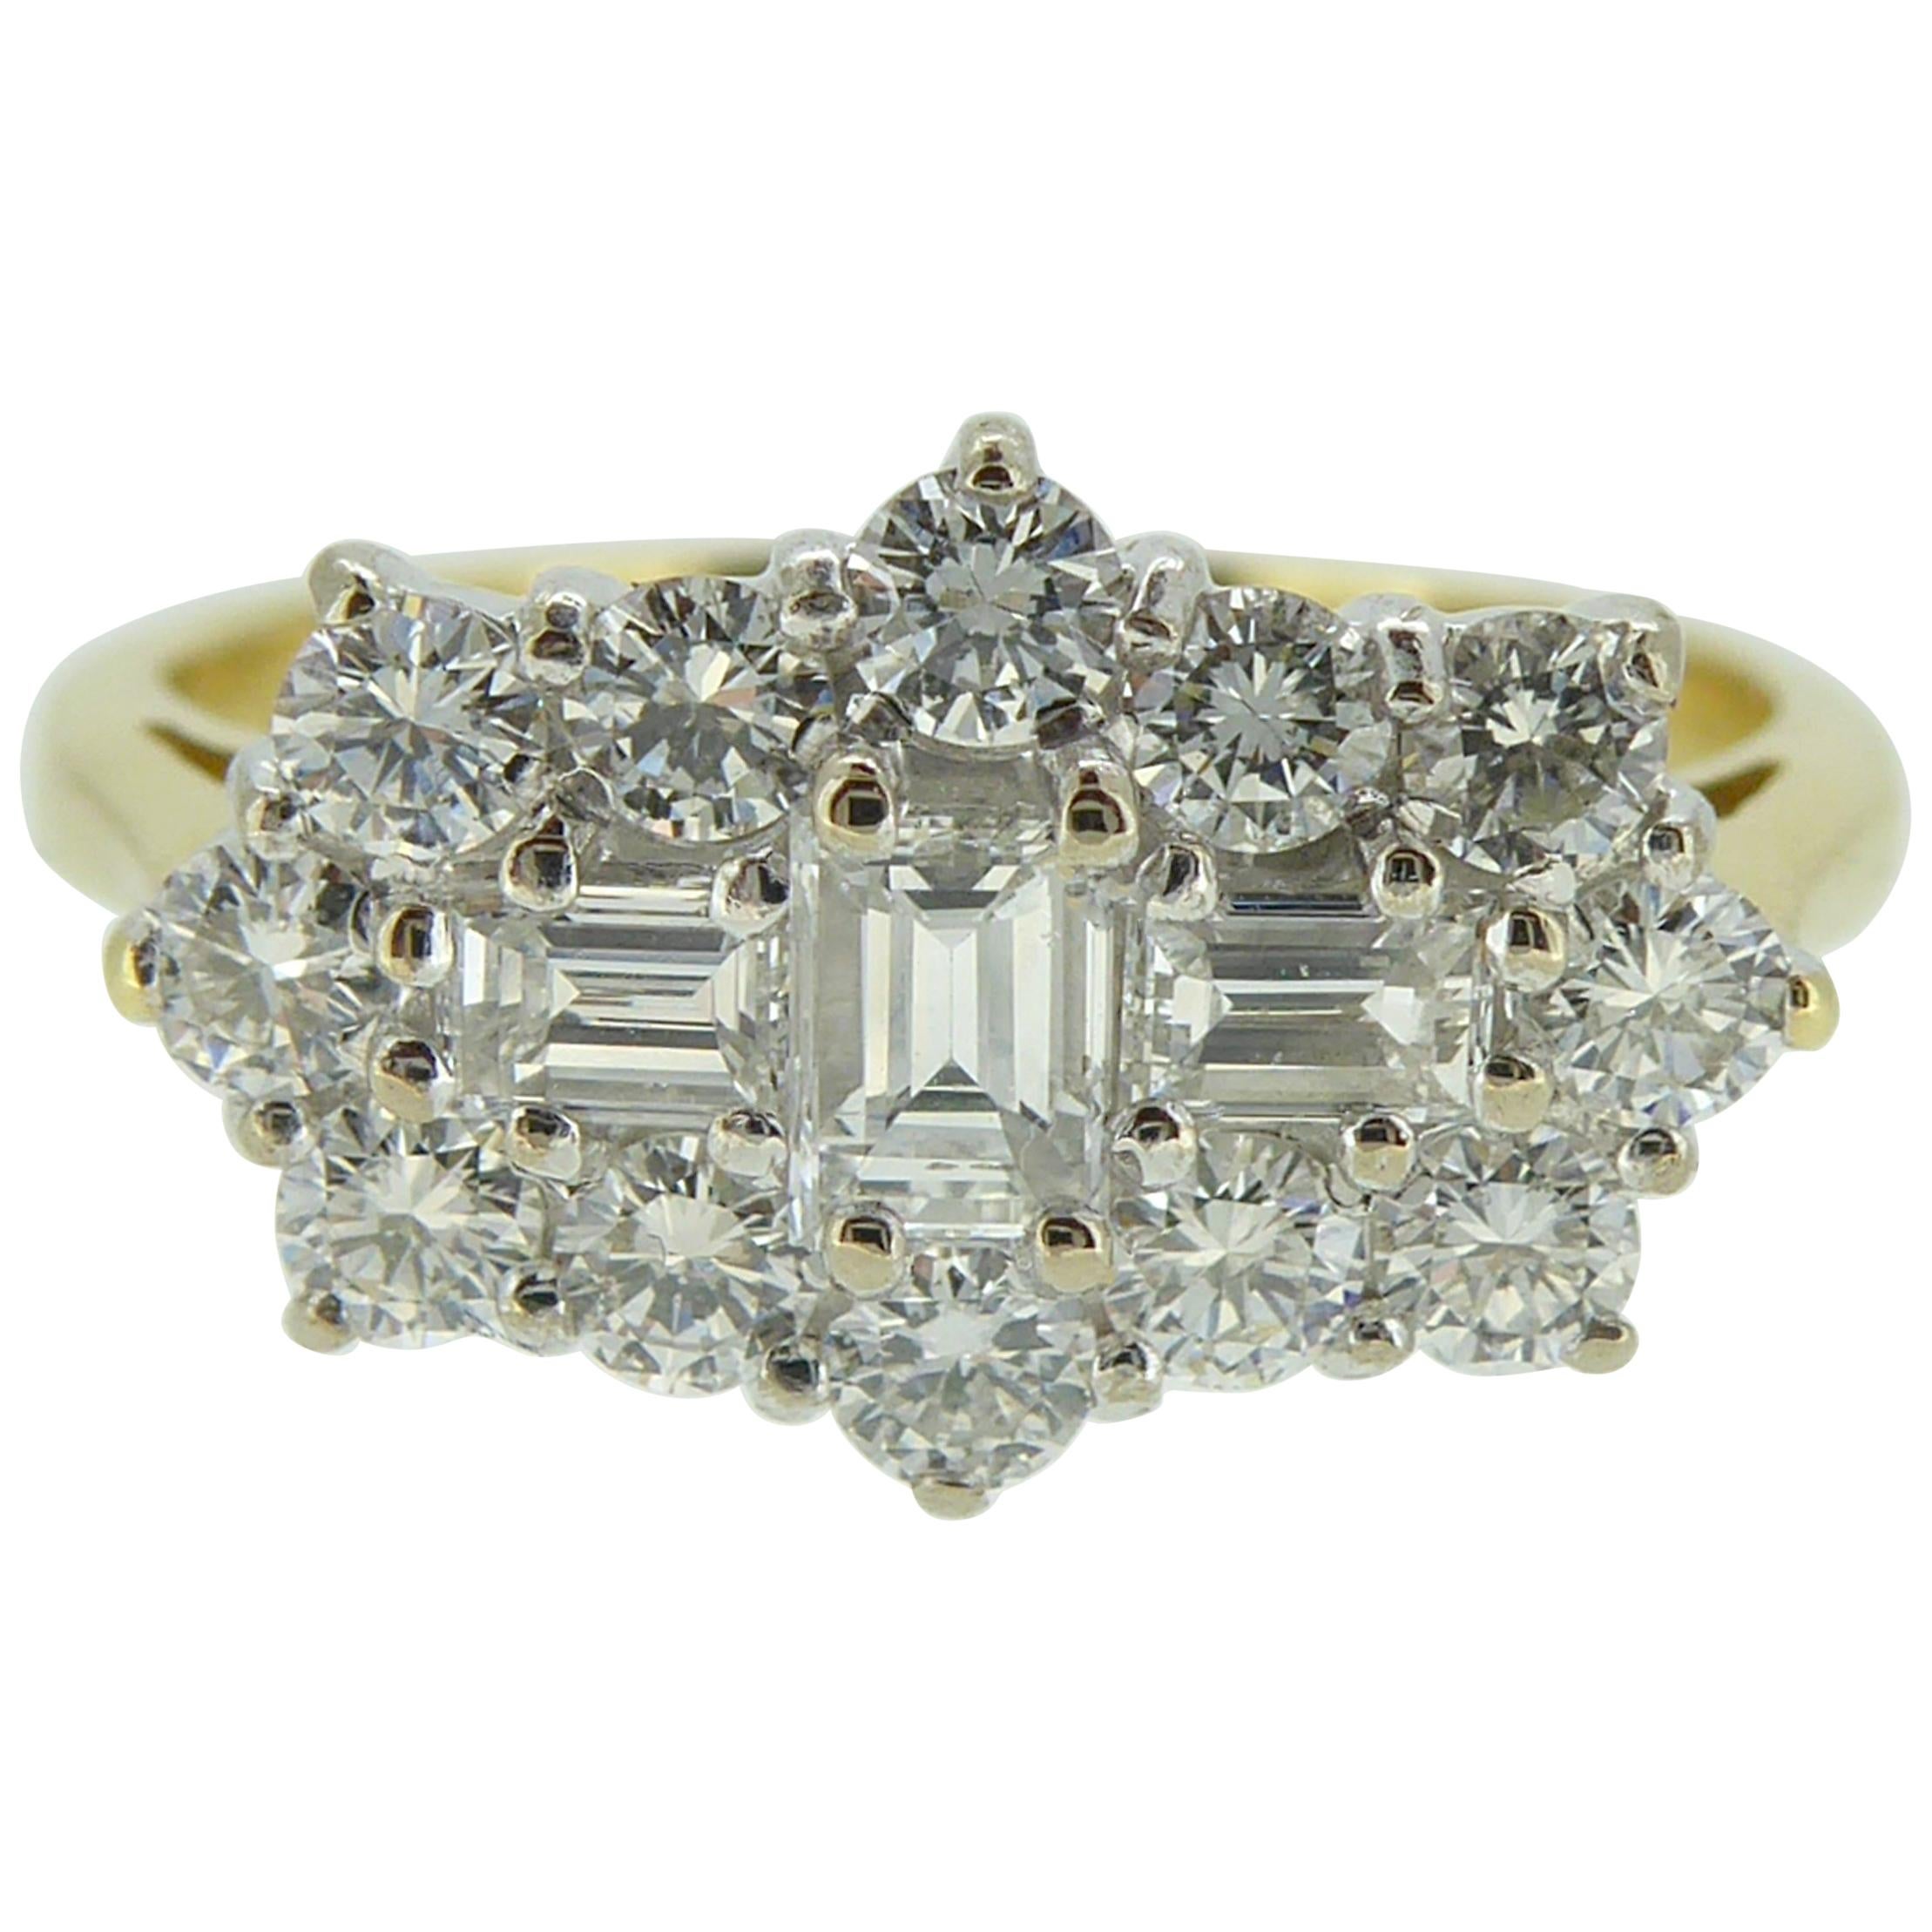 1.0 Carat Diamond Cluster Ring, Baguette and Brilliant Cut, Boat Shape Style